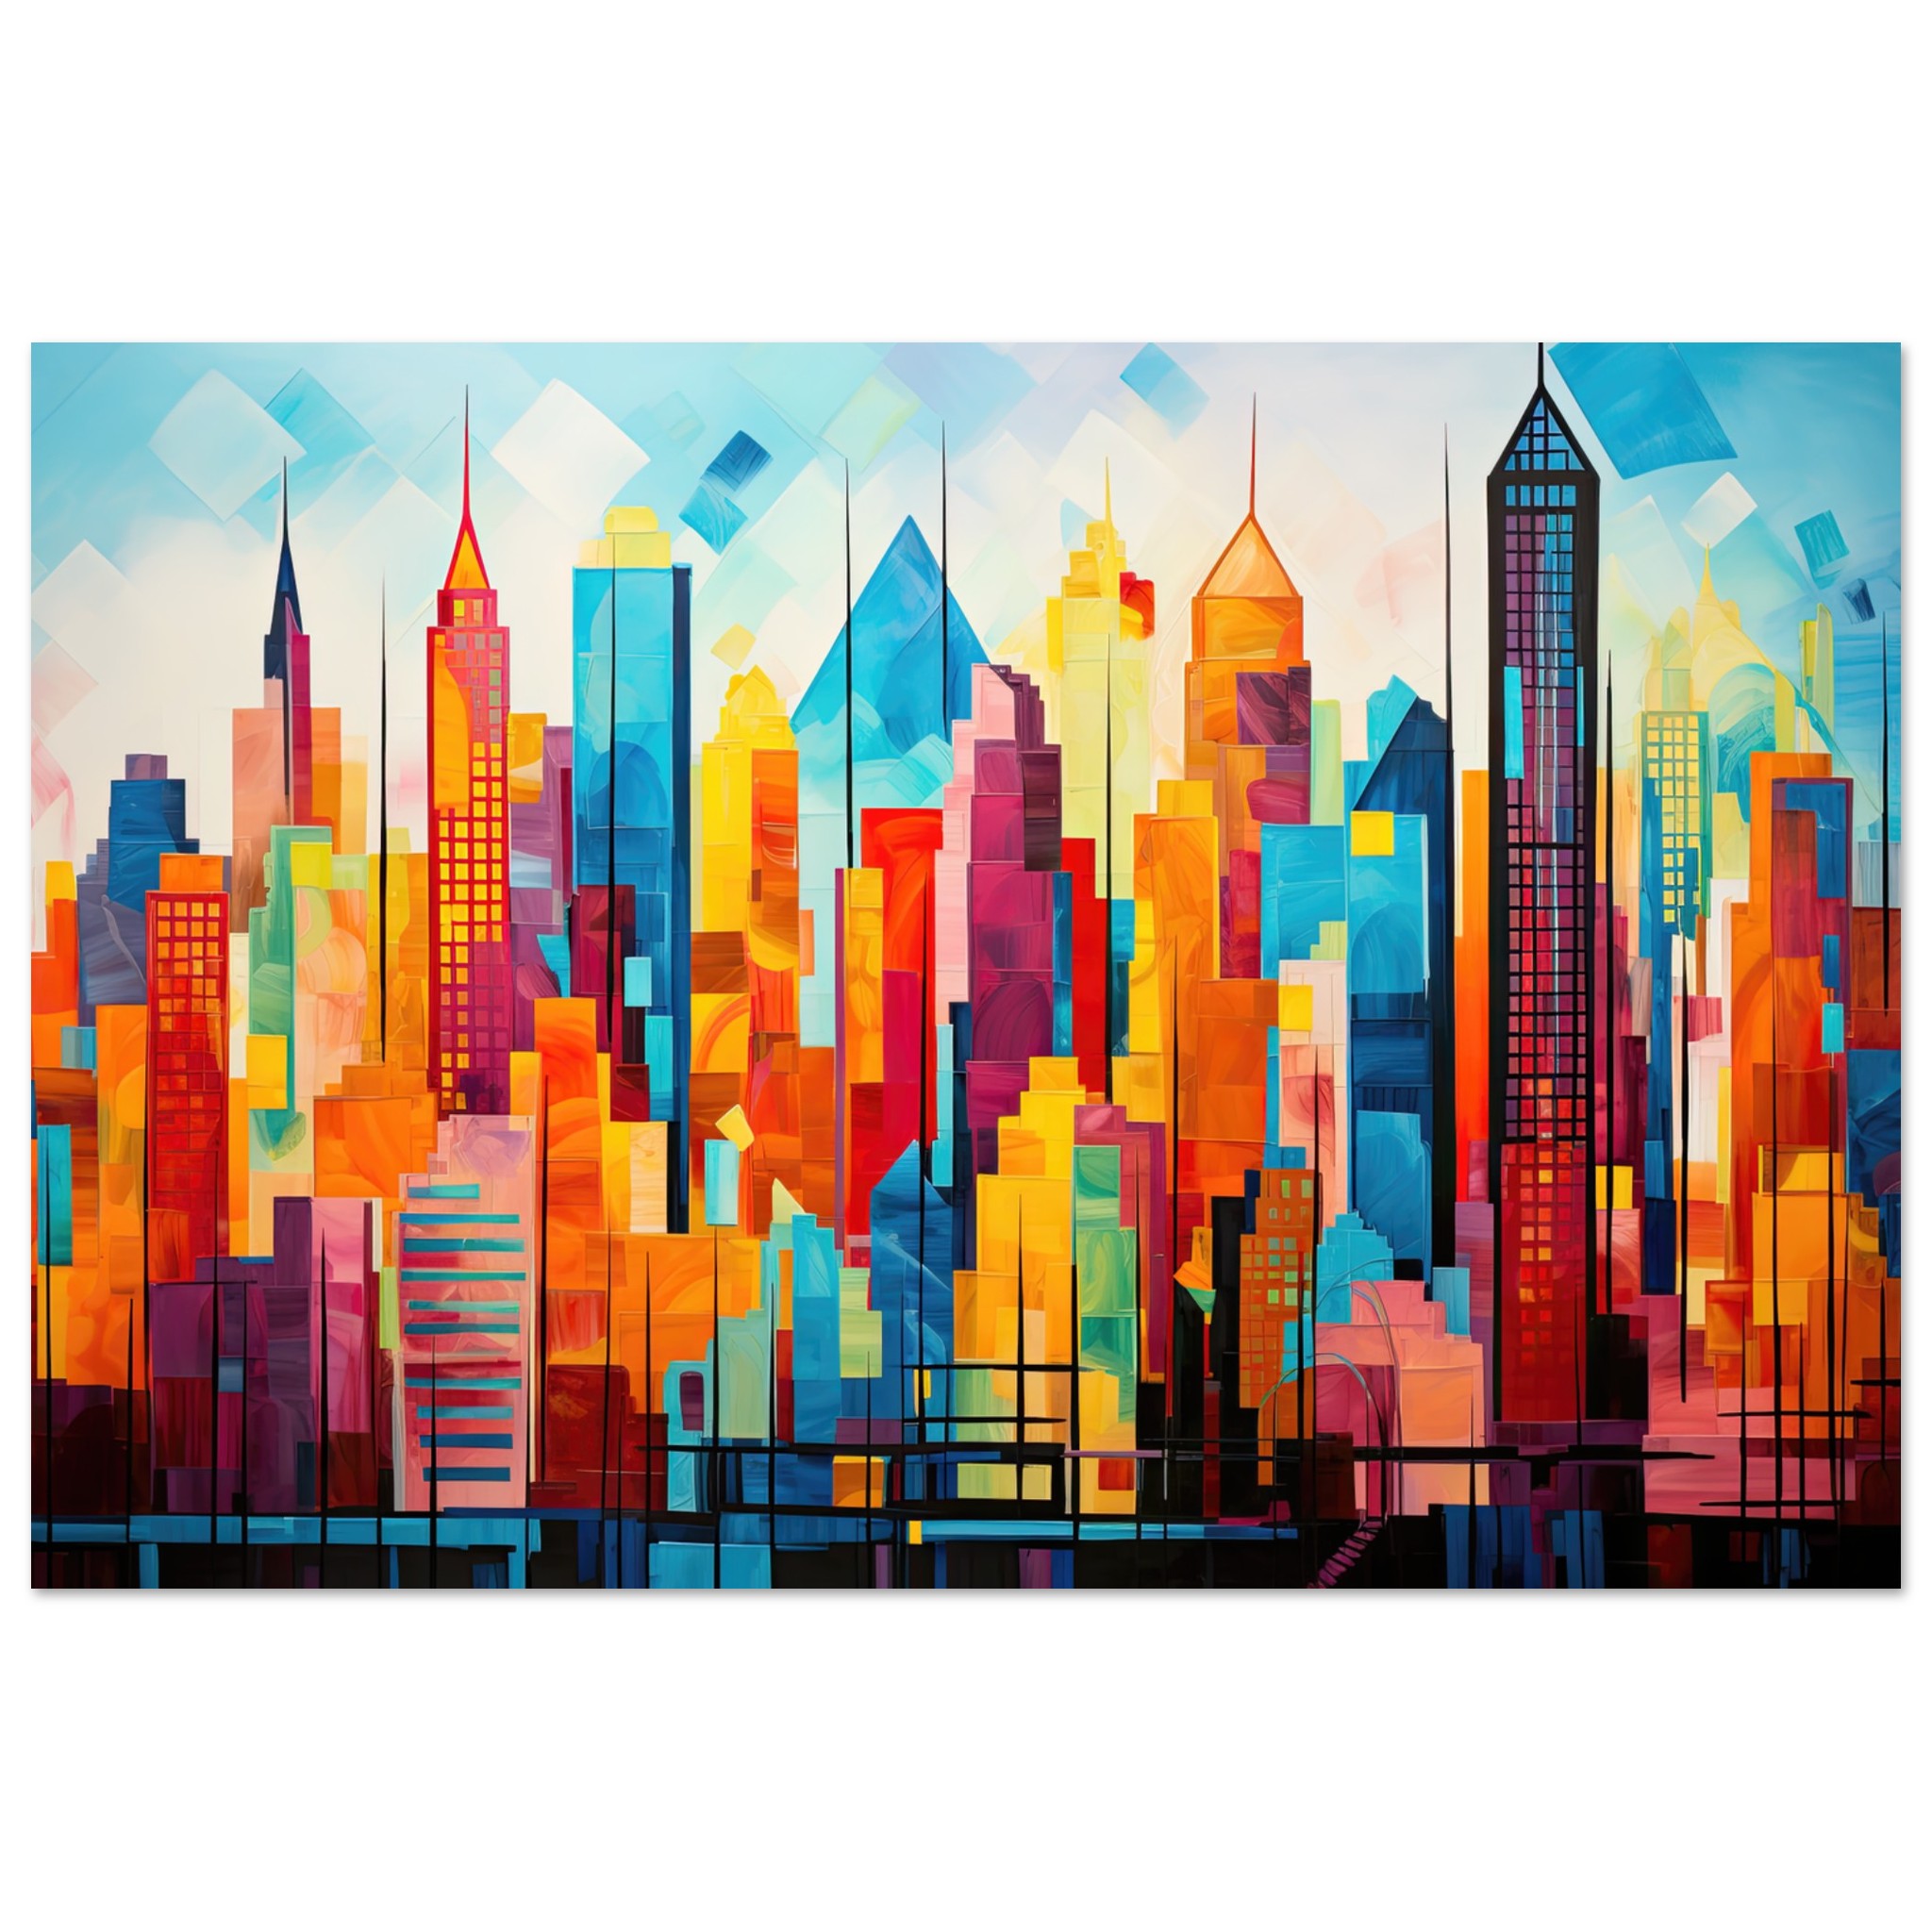 Colorful Abstract Cityscape Painted – Metal Print – 60×90 cm / 24×36″